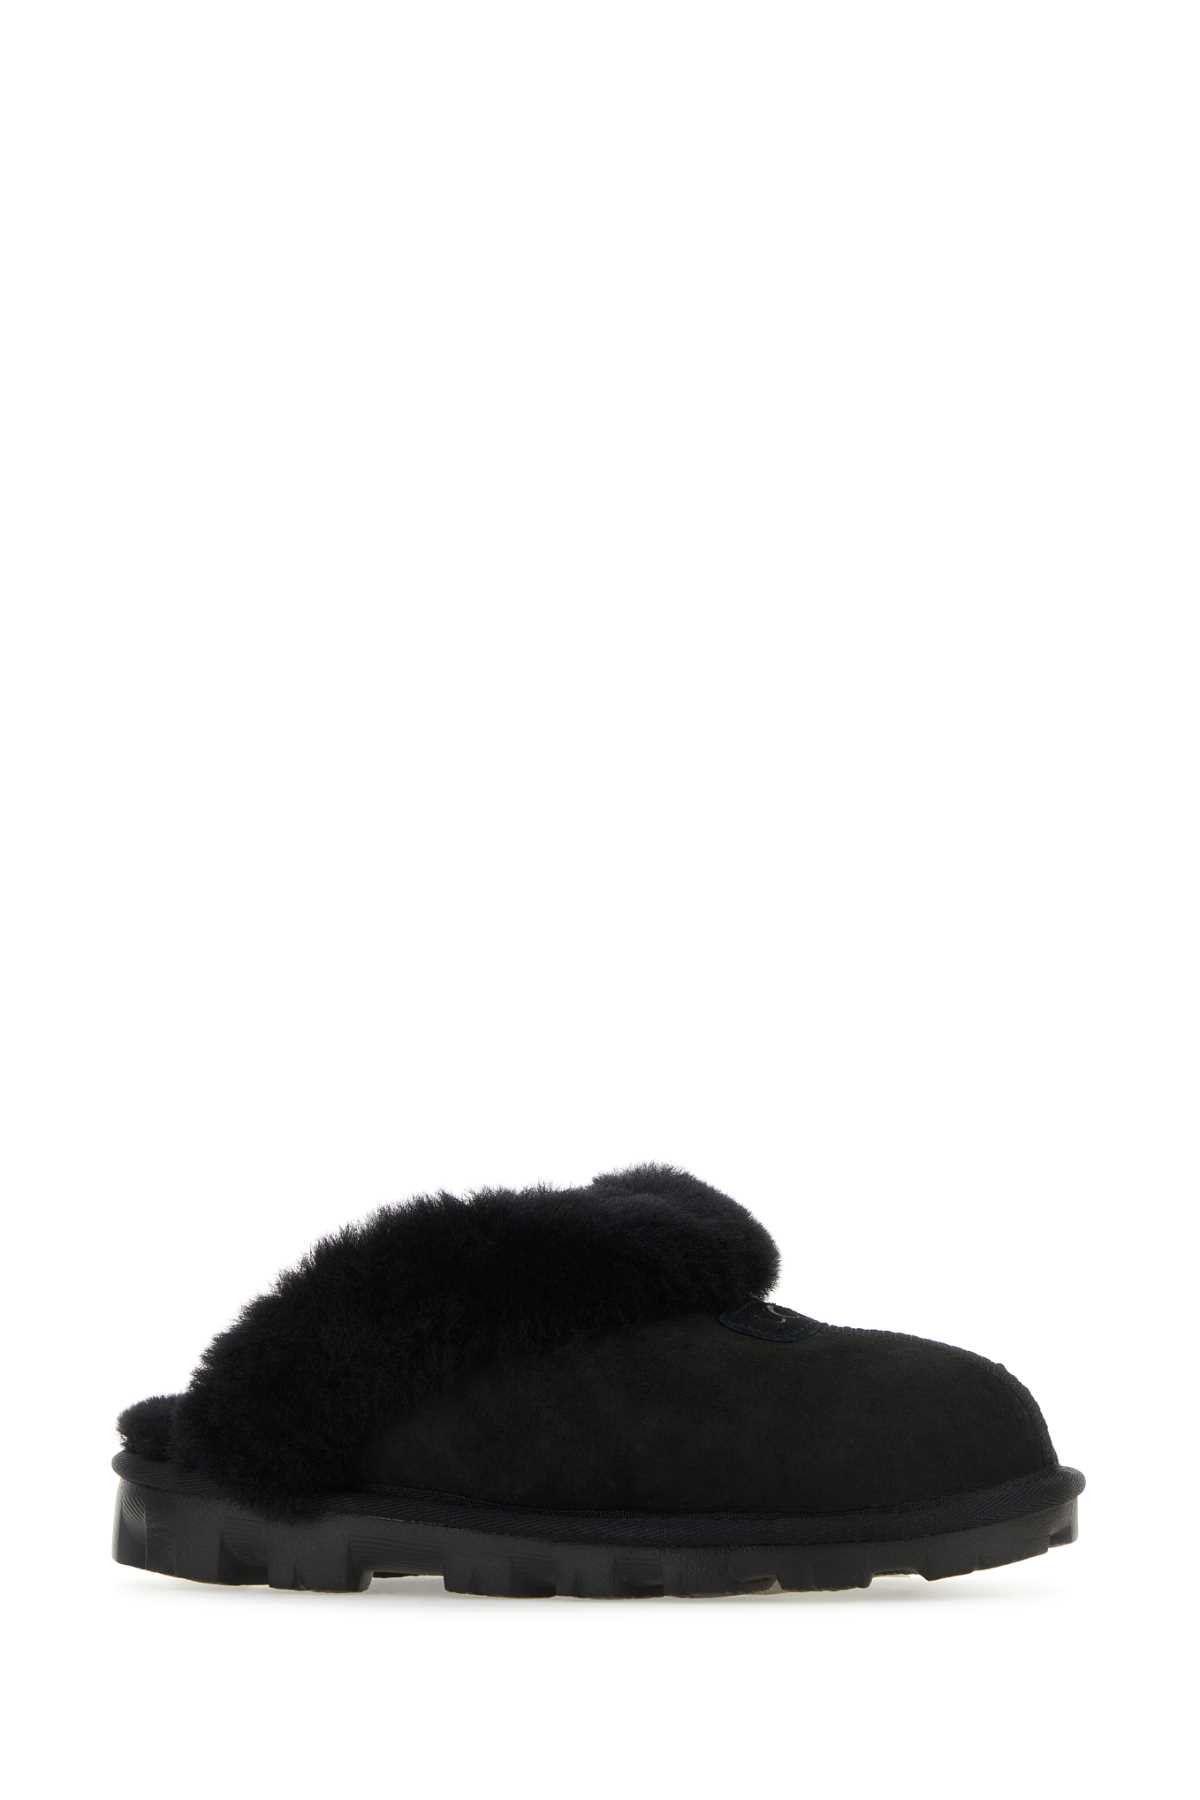 Shop Ugg Black Suede Coquette Slippers